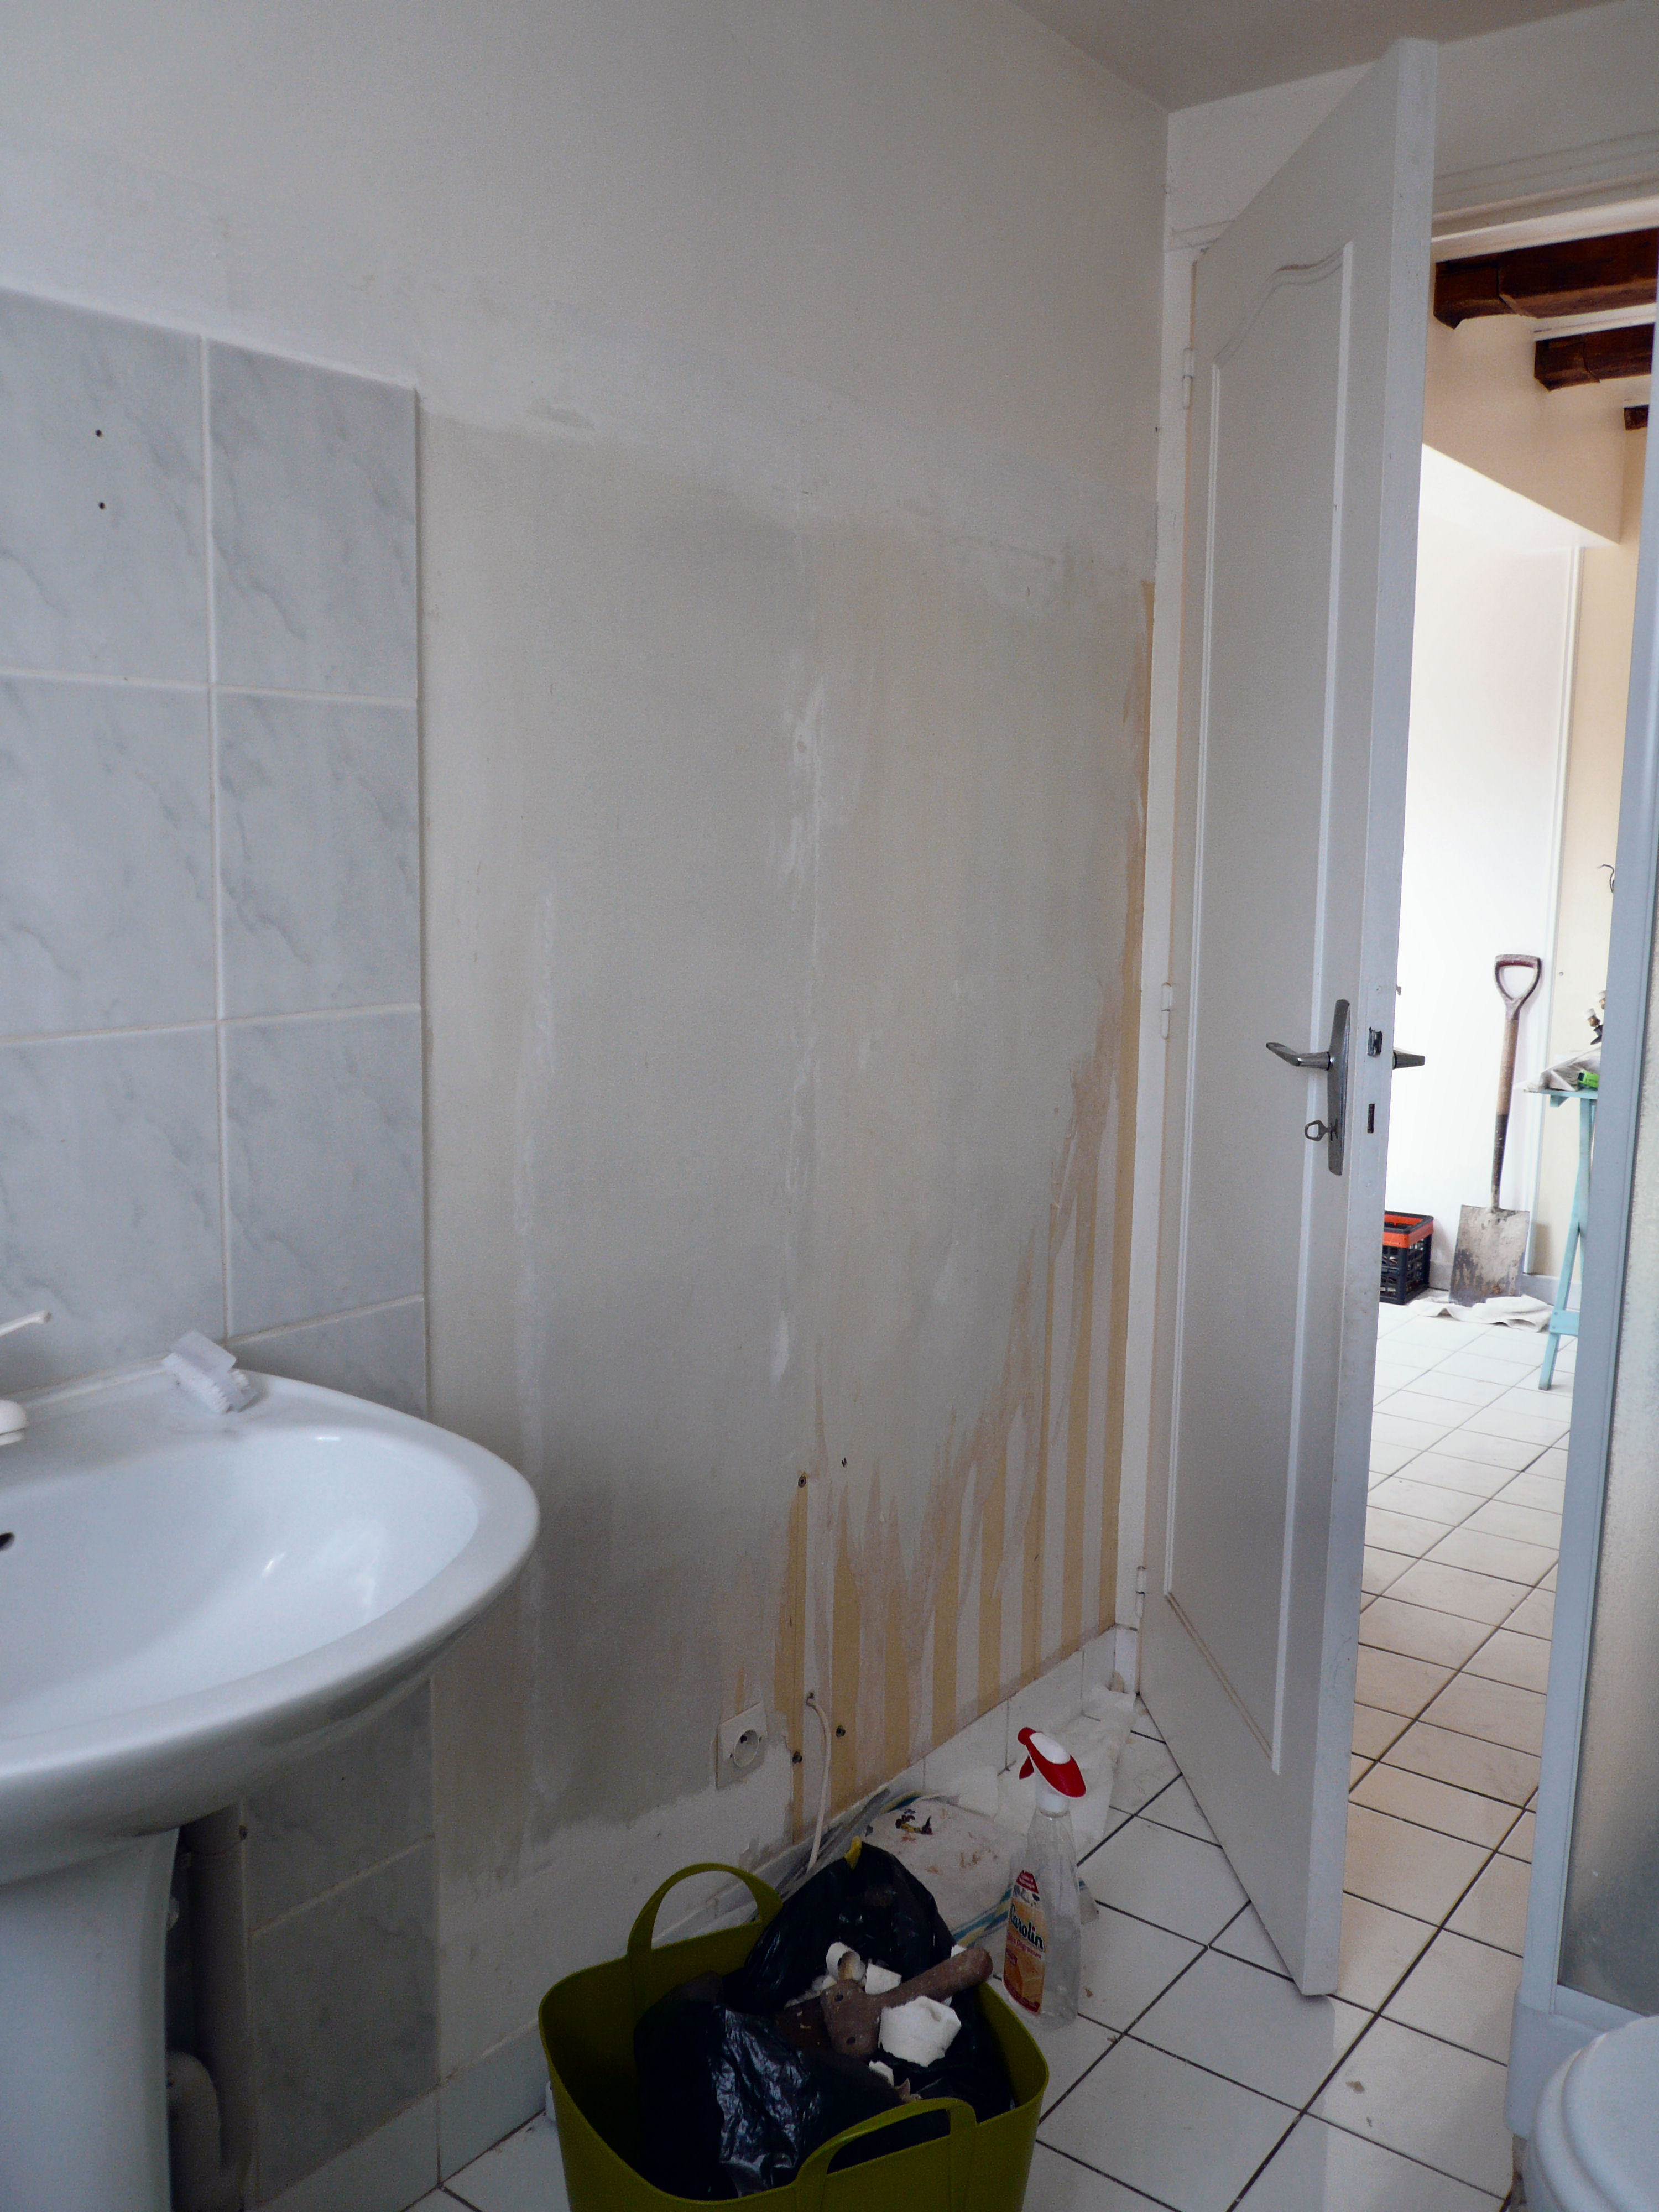 Bathroom - nearly finished stripping!